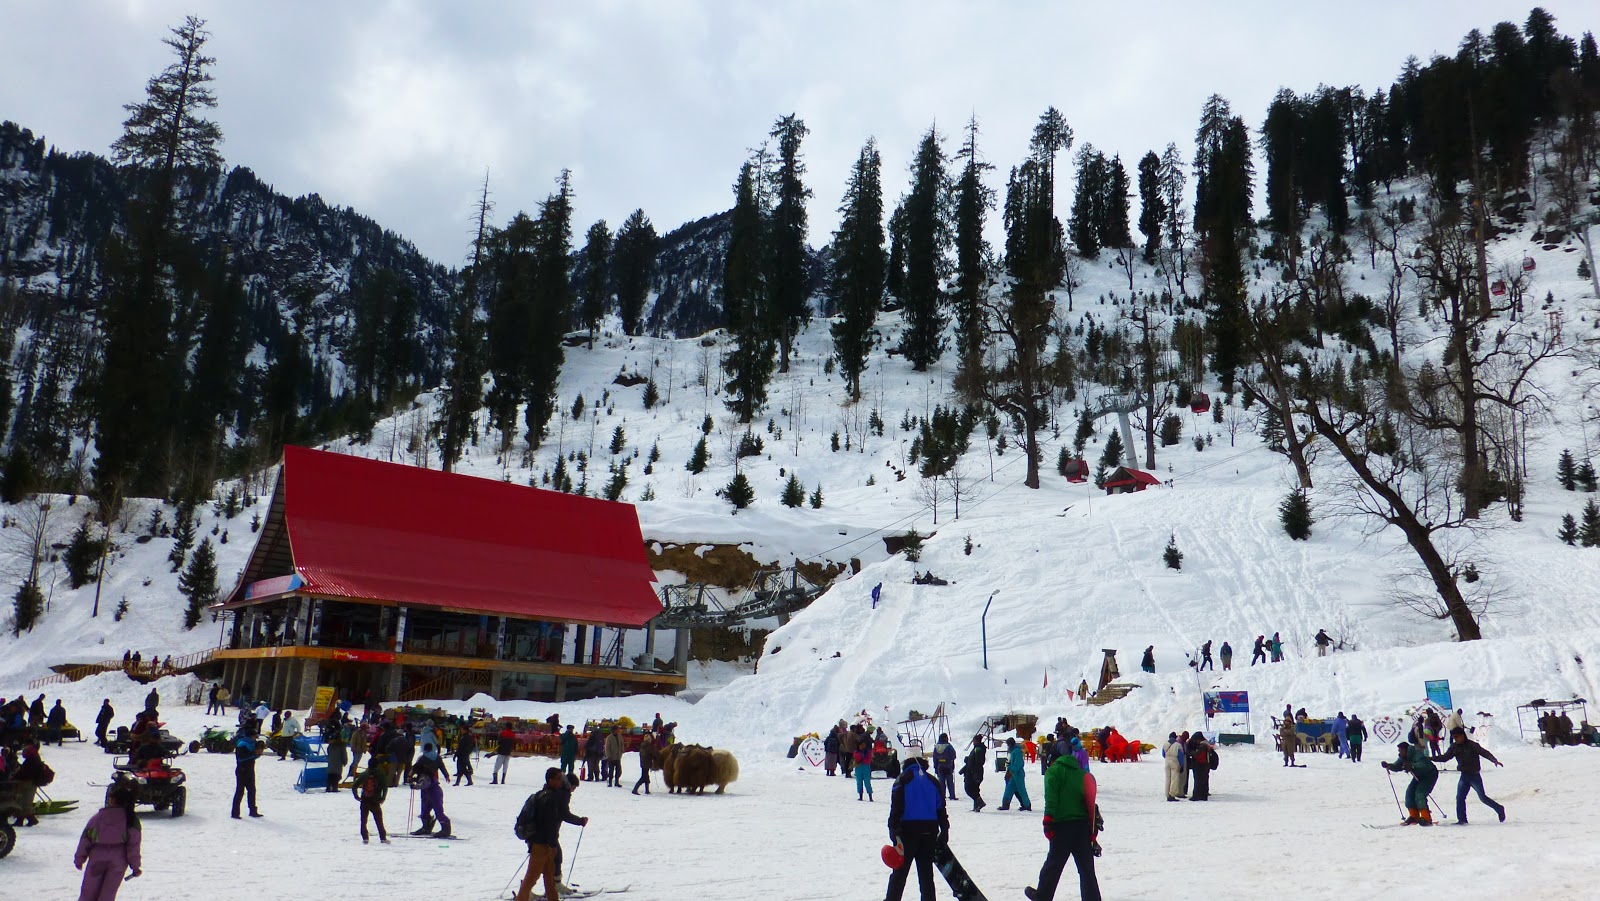 snow in manali - fun place to hang out with friends in india